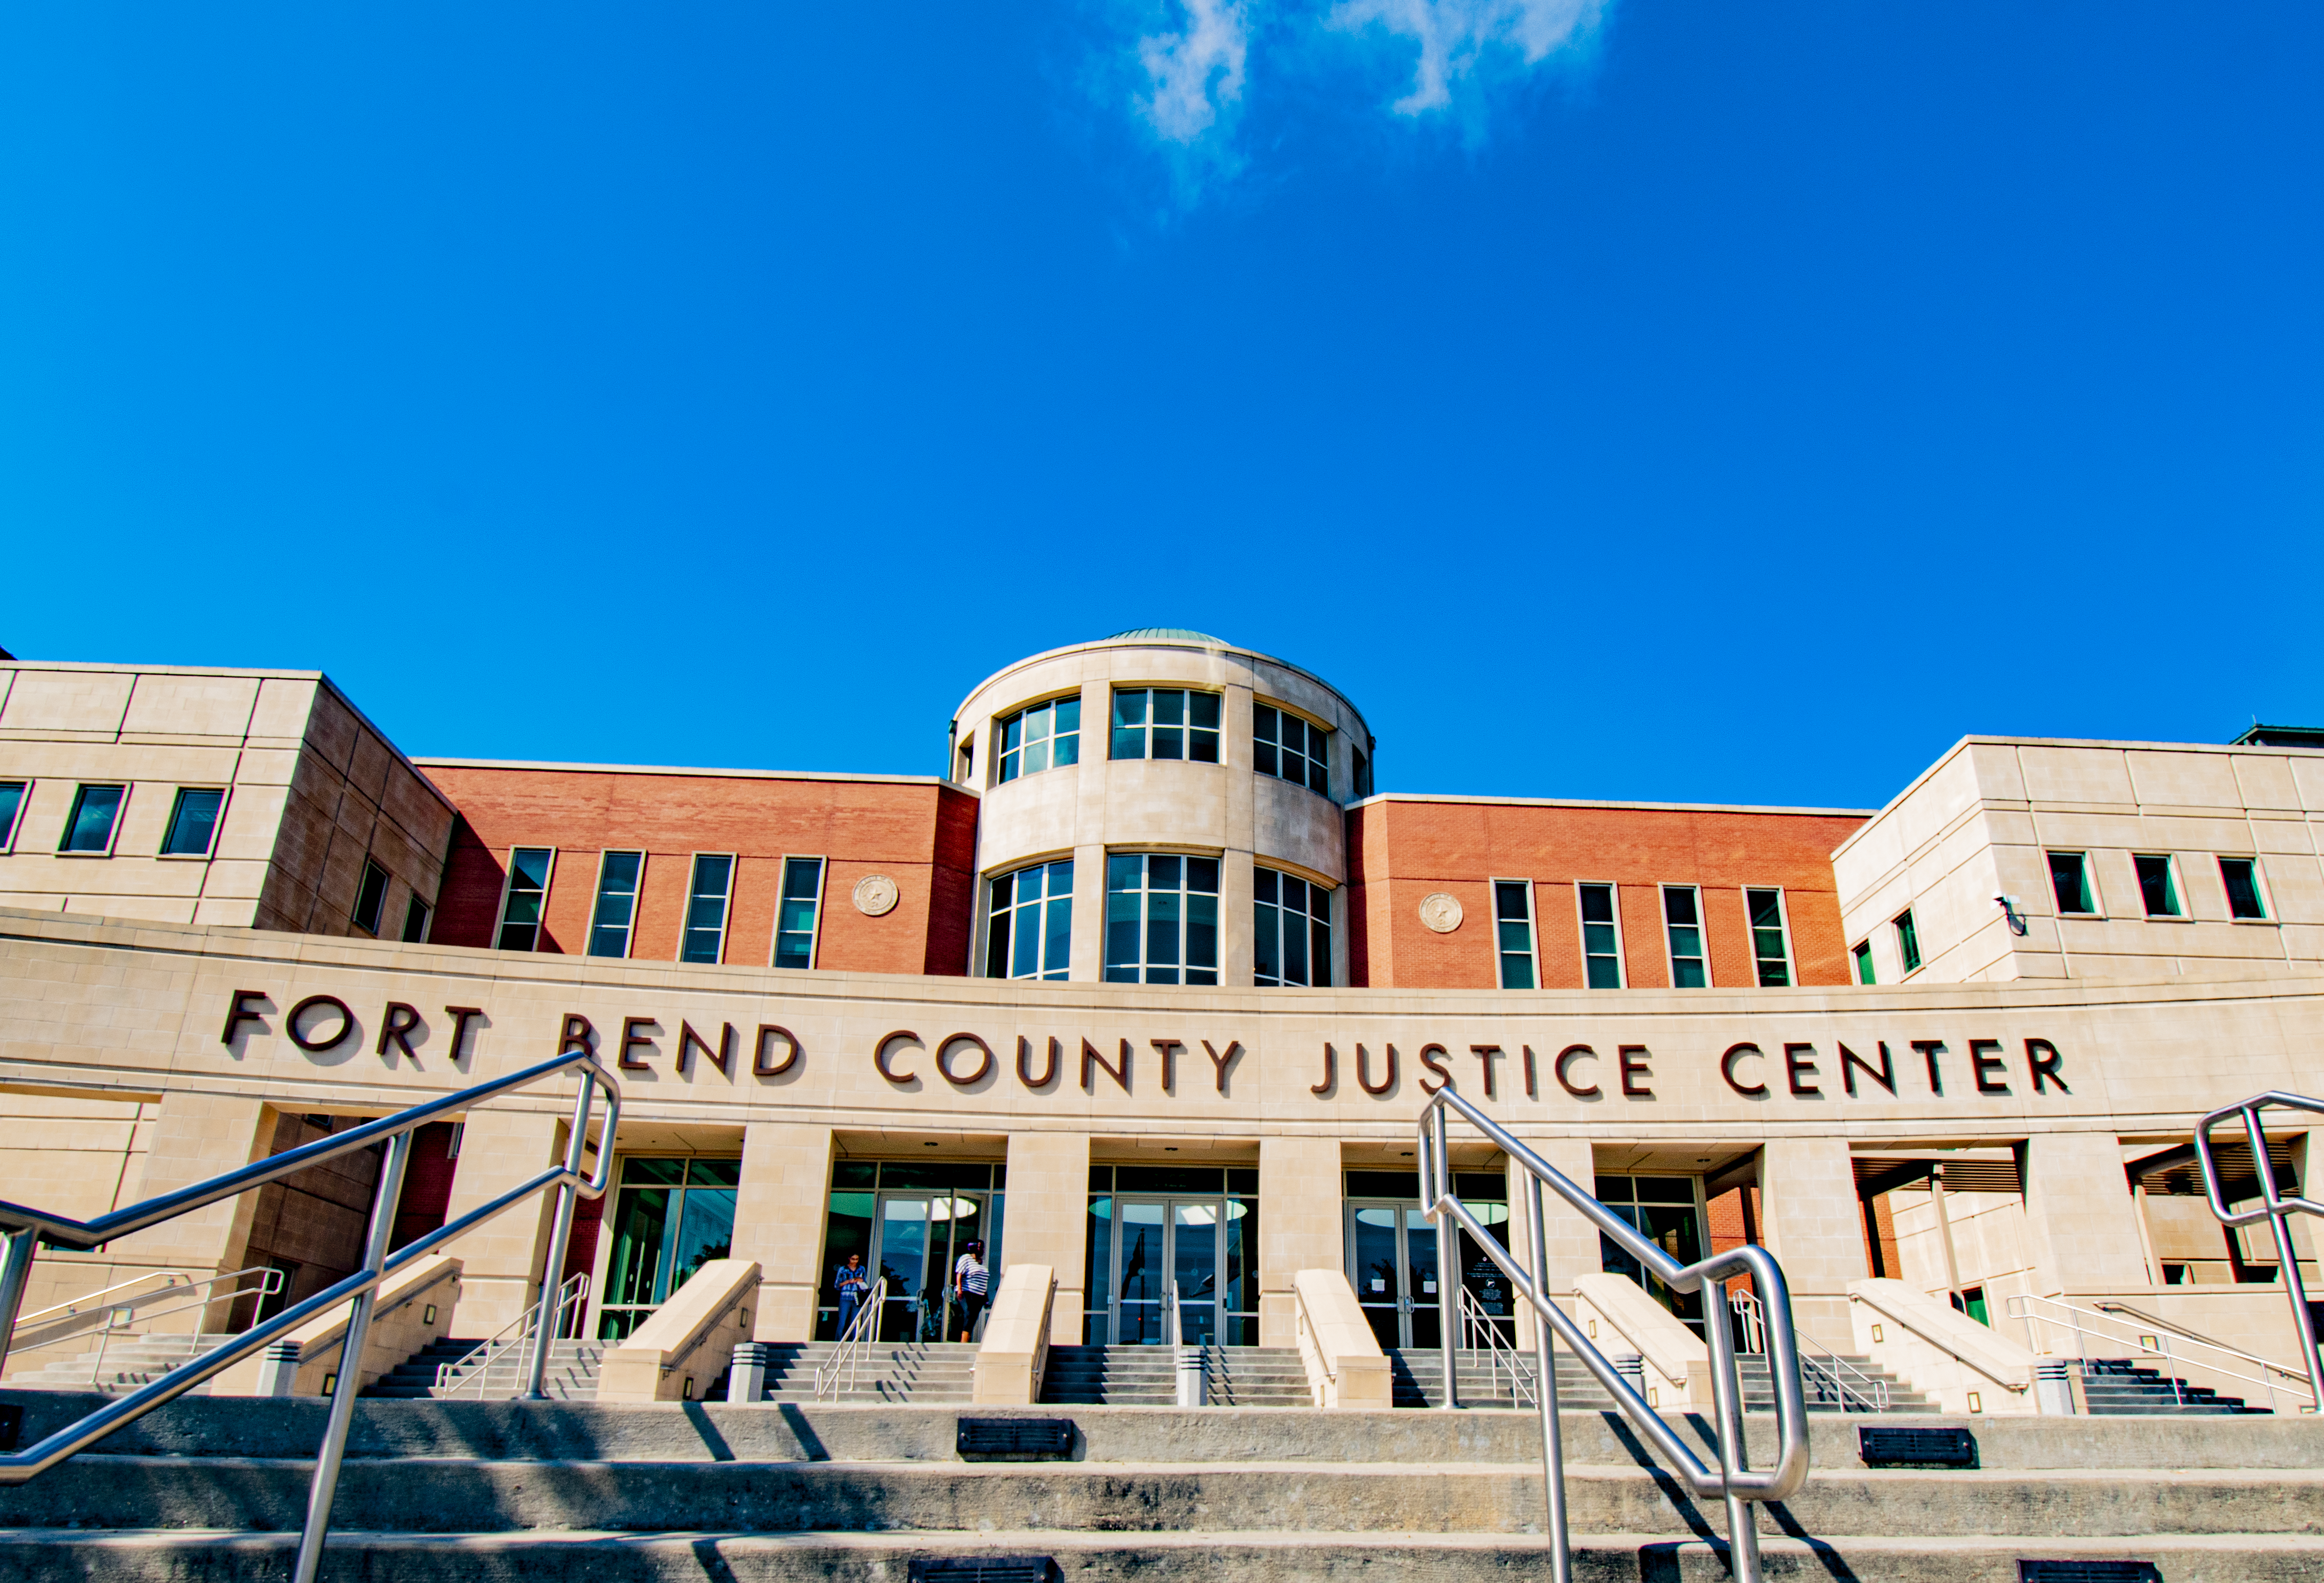 Fort Bend County Justice Center 01